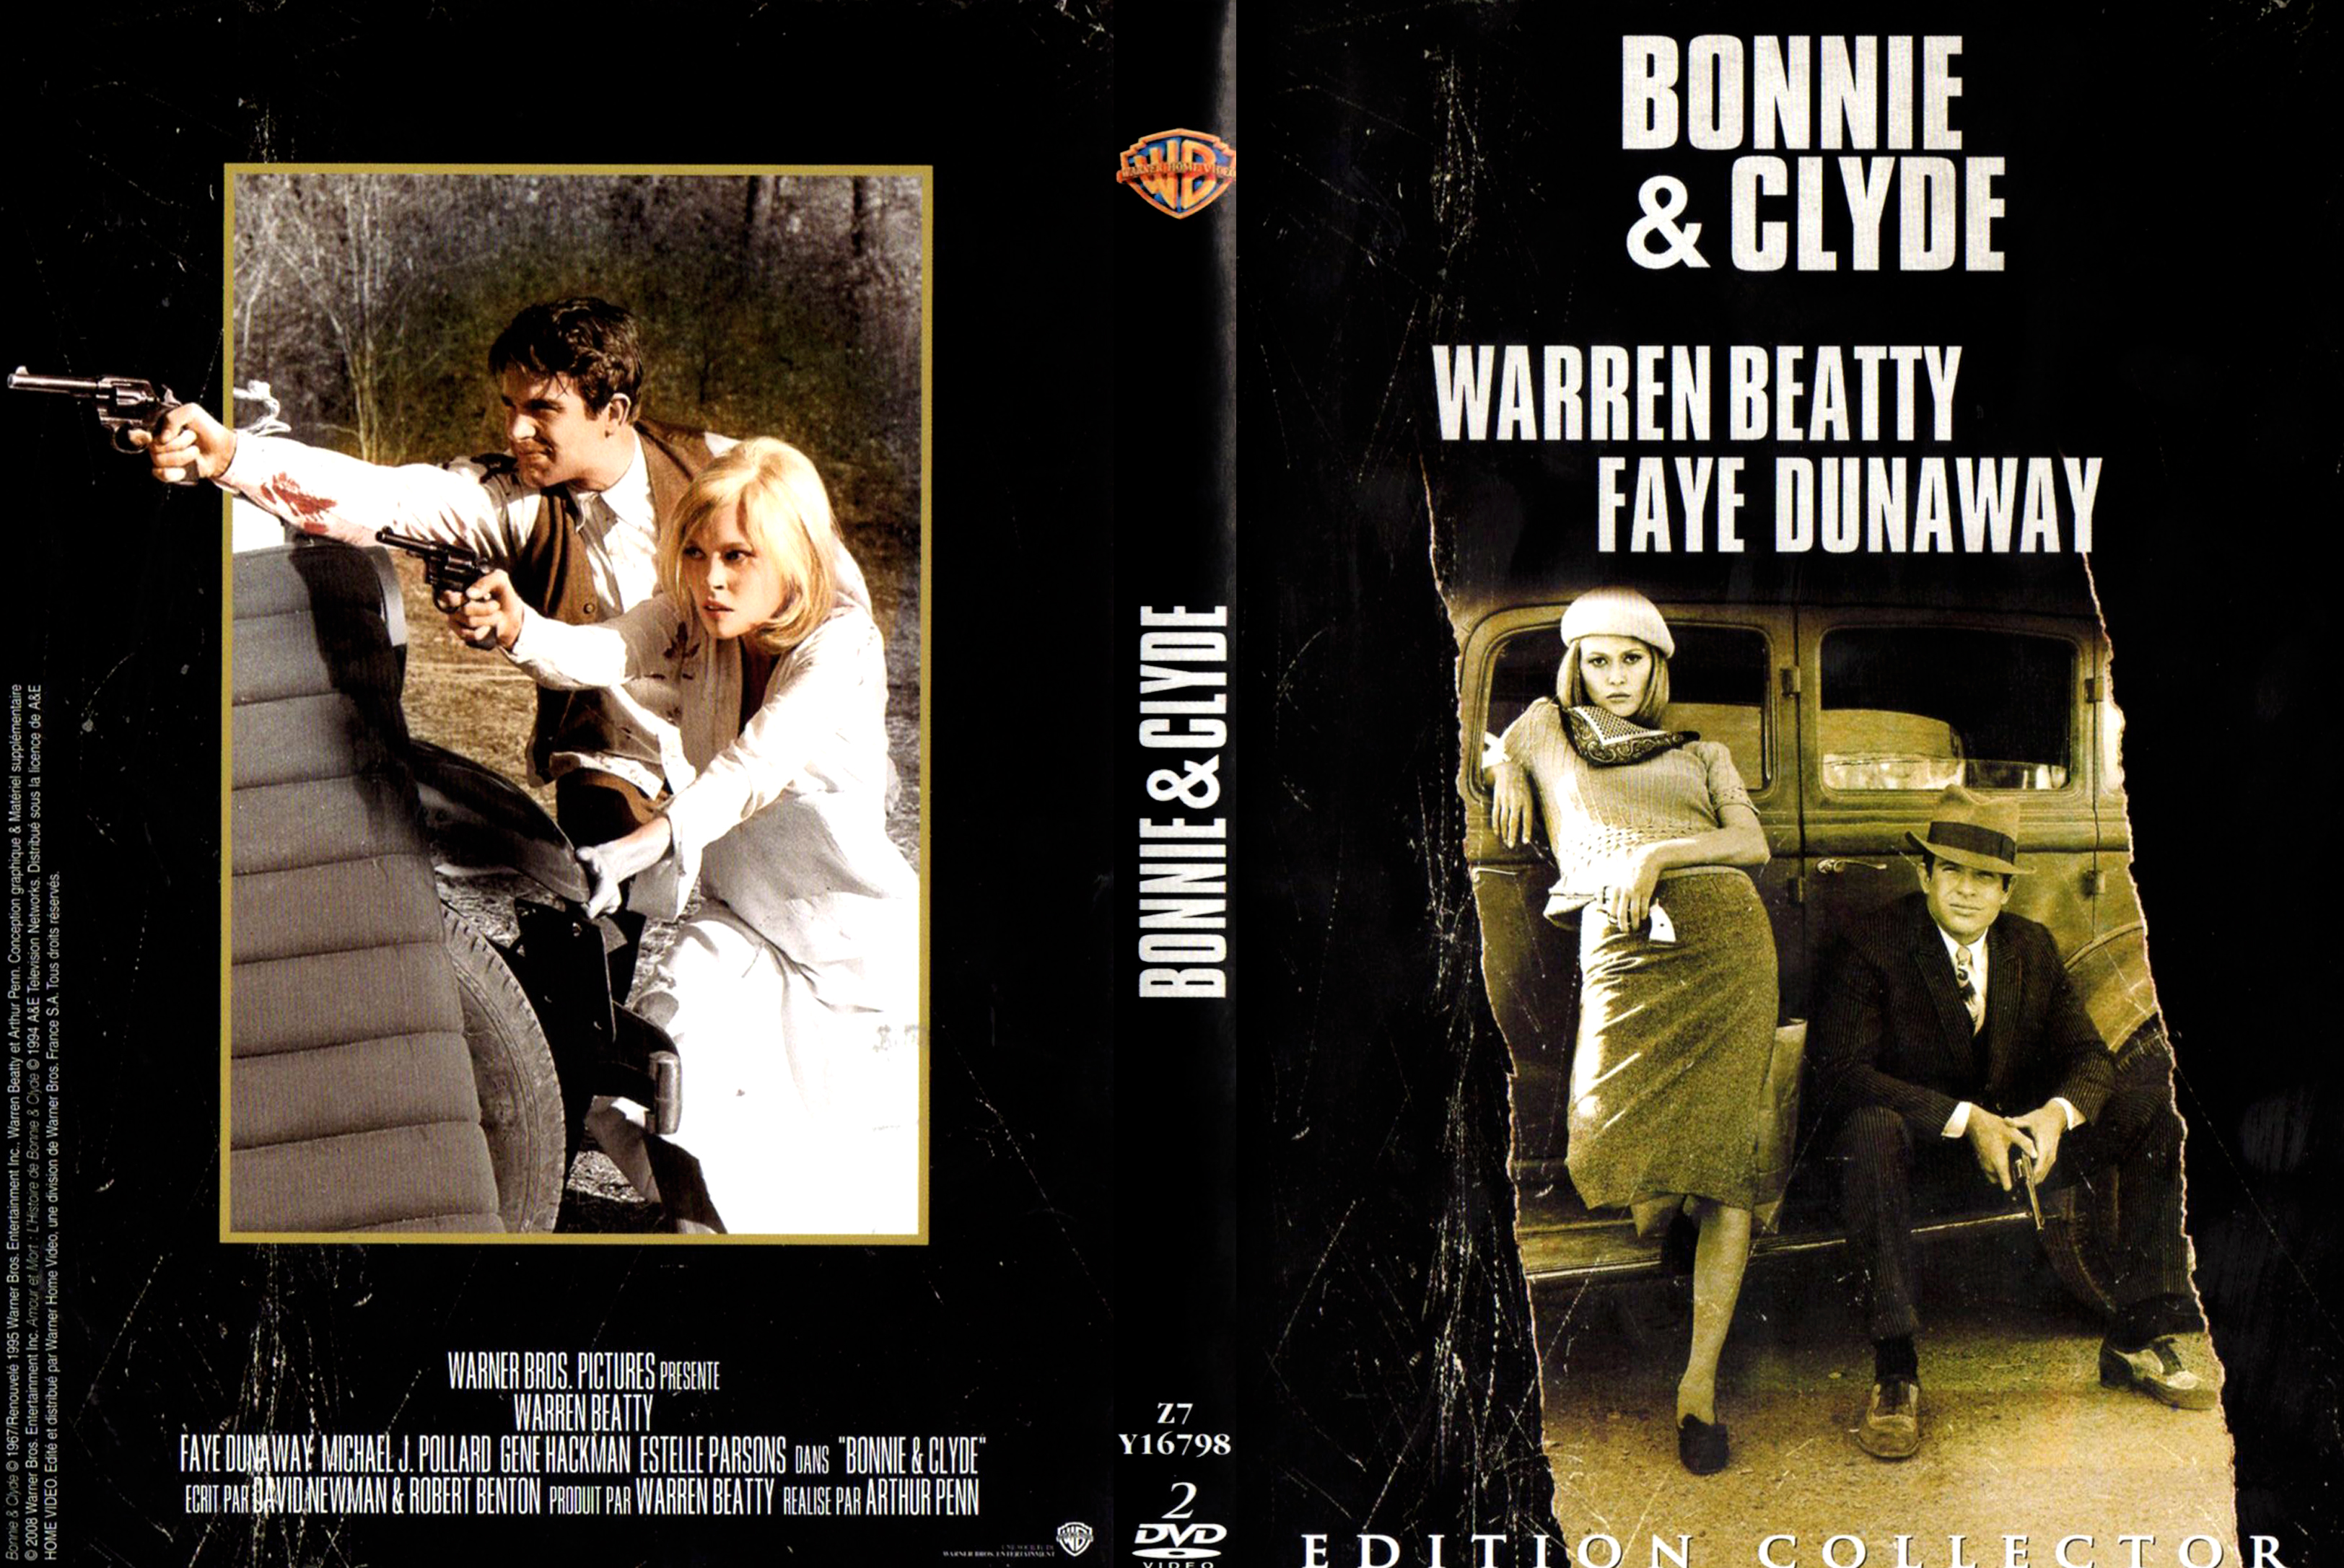 Jaquette DVD Bonnie and Clyde v2